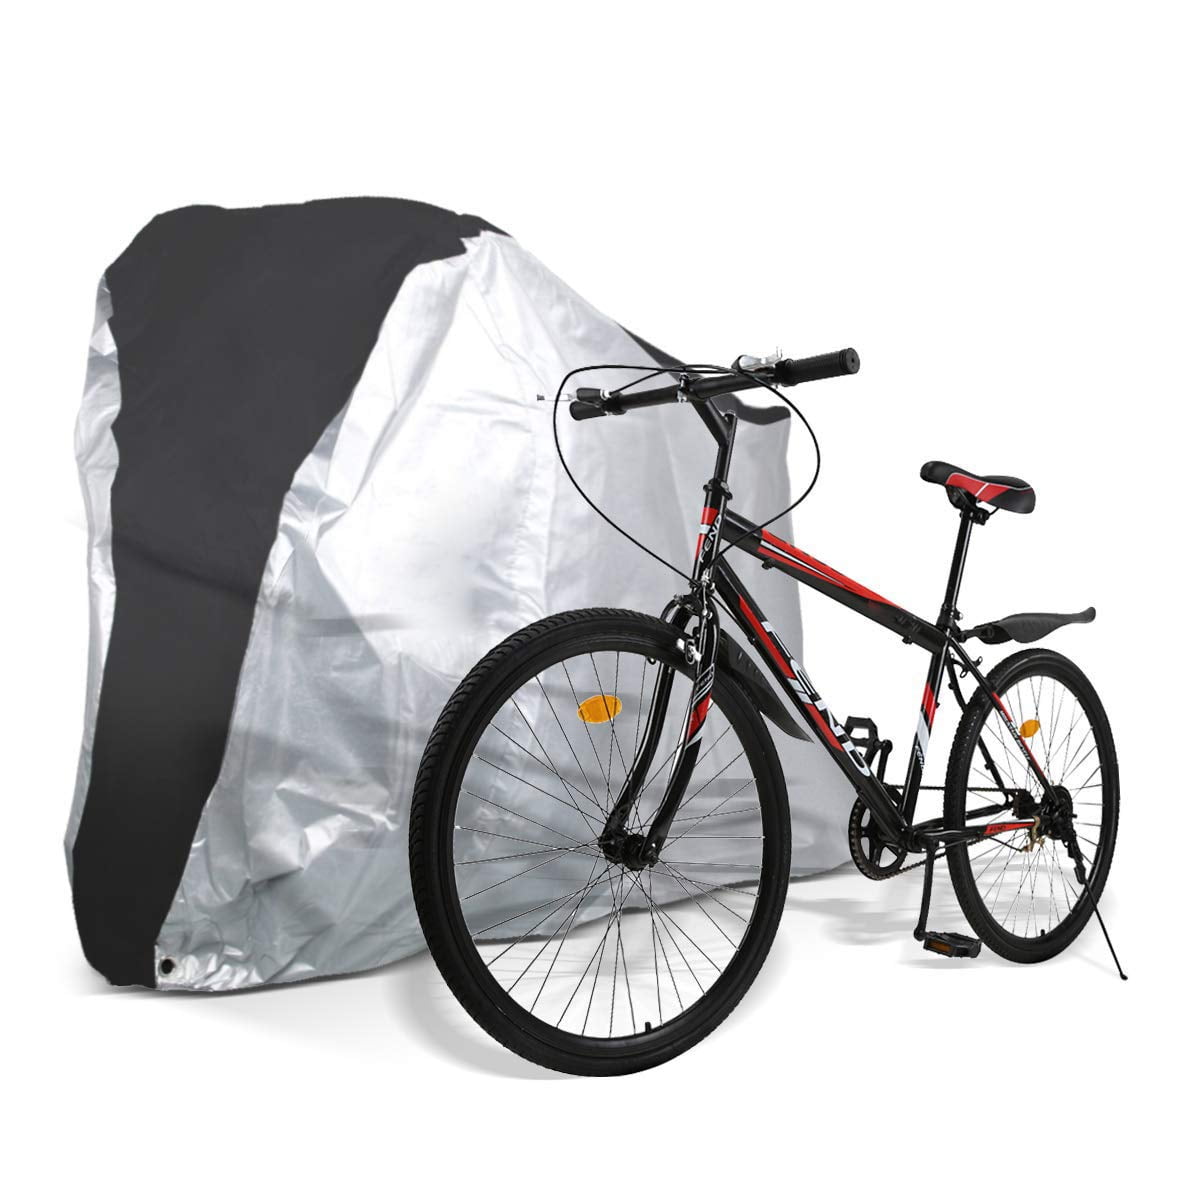 Details about   Polyester Waterproof Bike Cover Snow Dust UV Outdoor for Bicycle Storage w/ Bag 